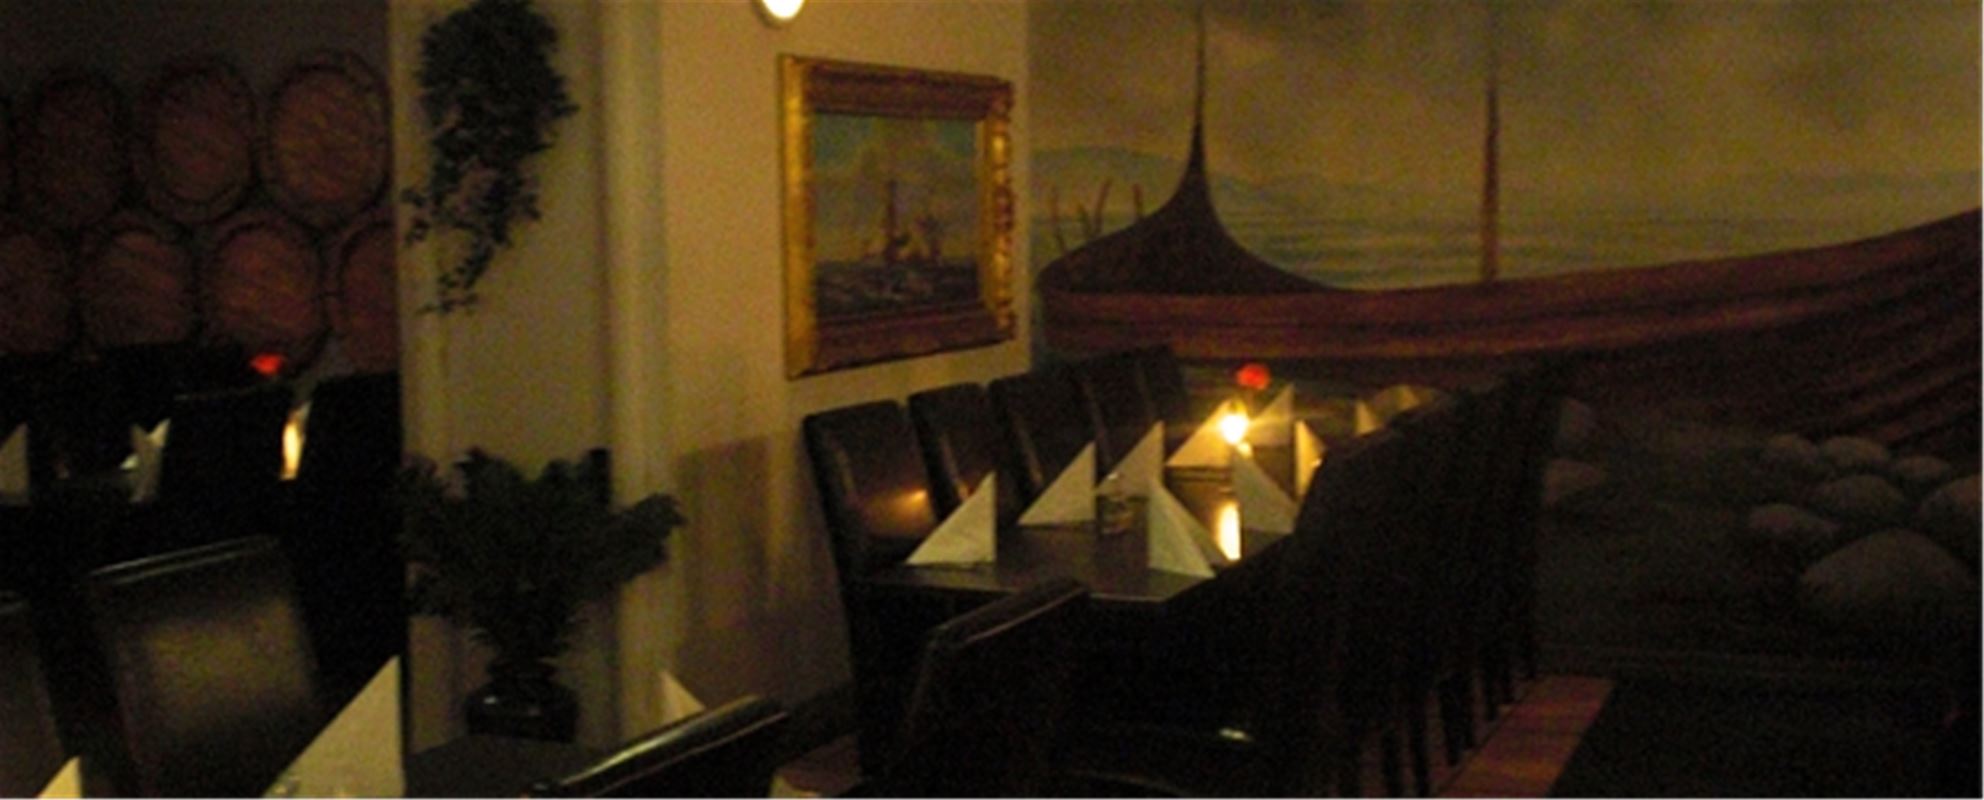 Interior picture from the restaurant, a set table with lit candles on the table.